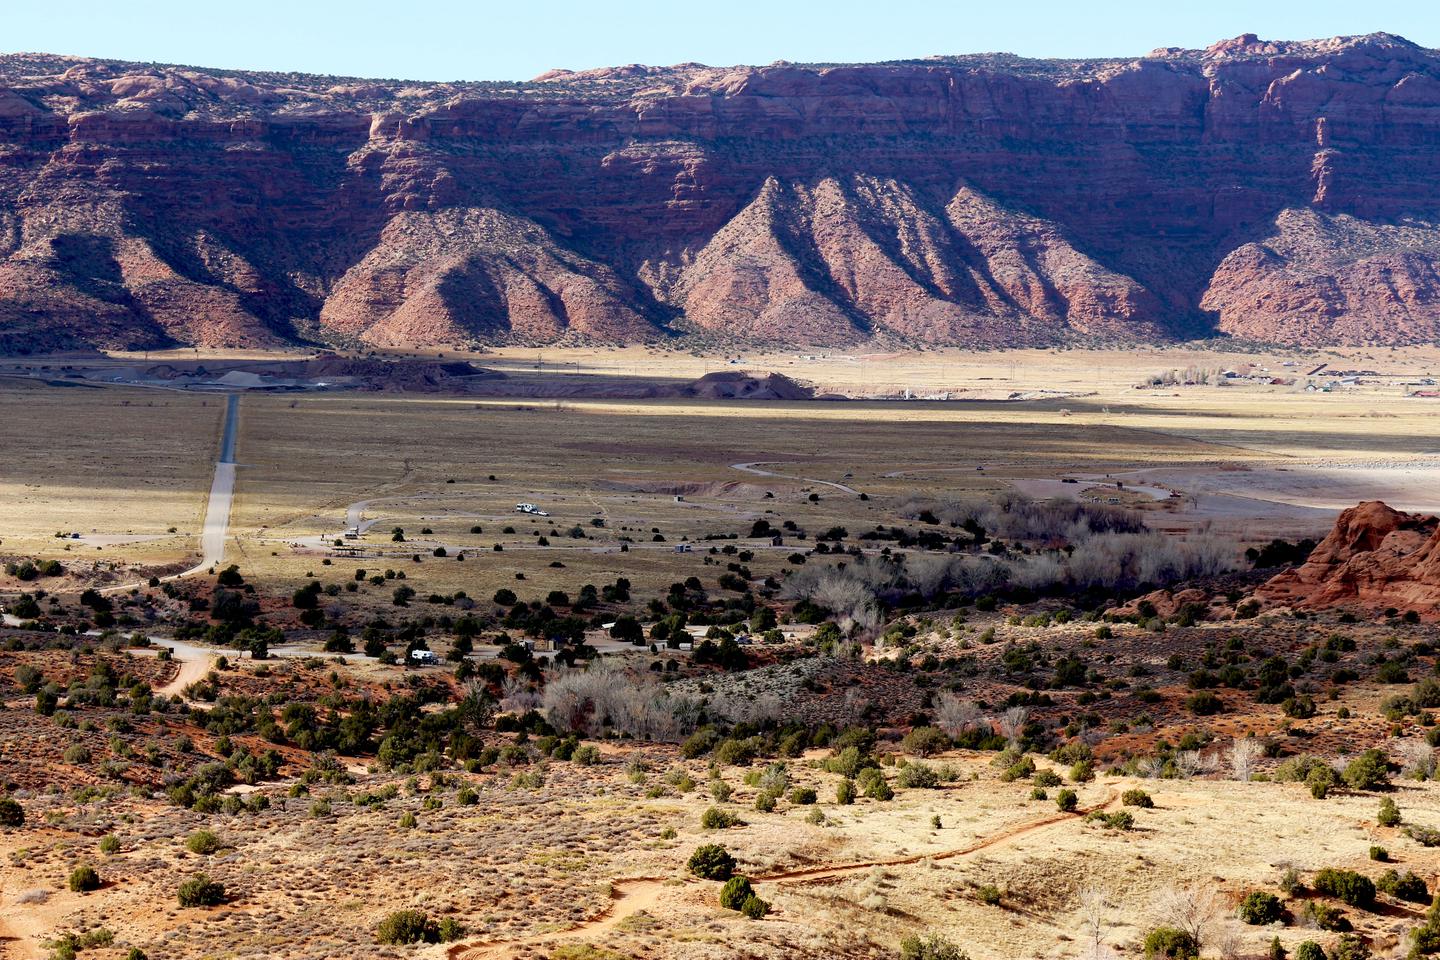 Overview of Ken's Lake Campground with desert cliffs in the background.